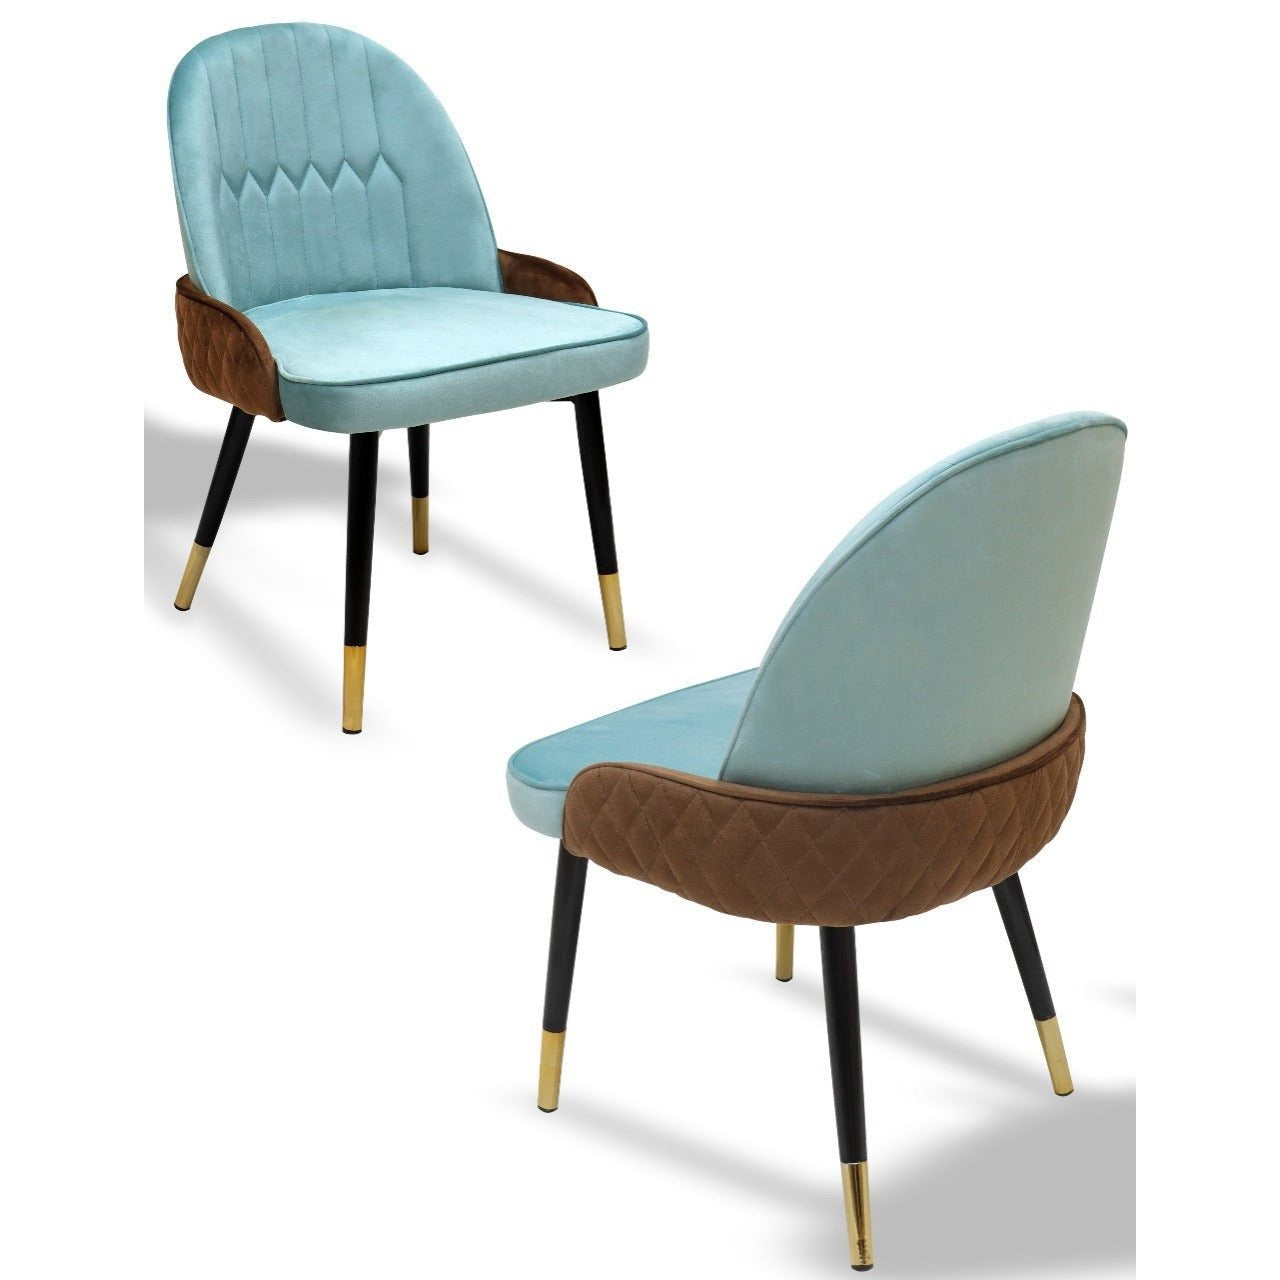 MM-LX493 DINING CHAIR Mobel Furniture